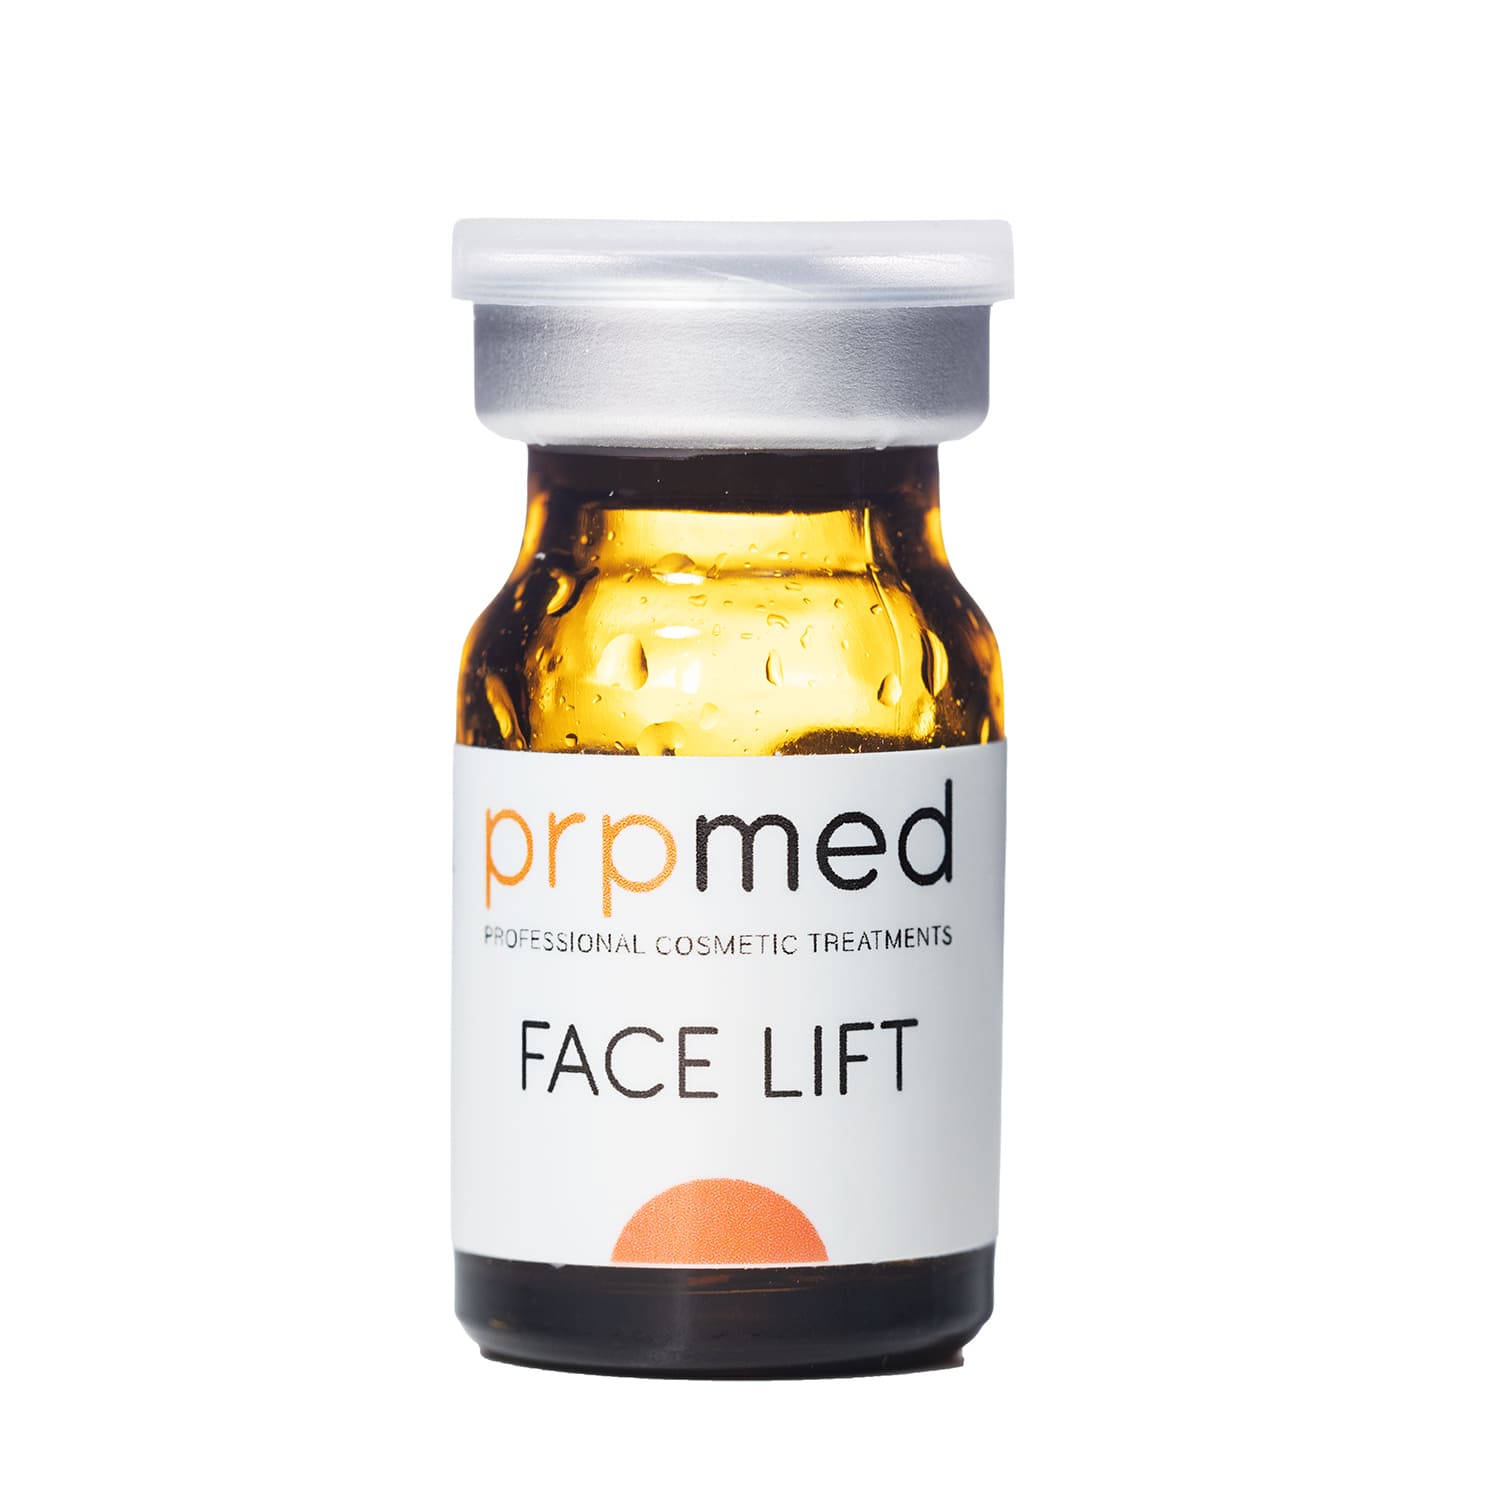 Face Lift Microneedling Serum by Prpmed Professional Cosmetic Treatments